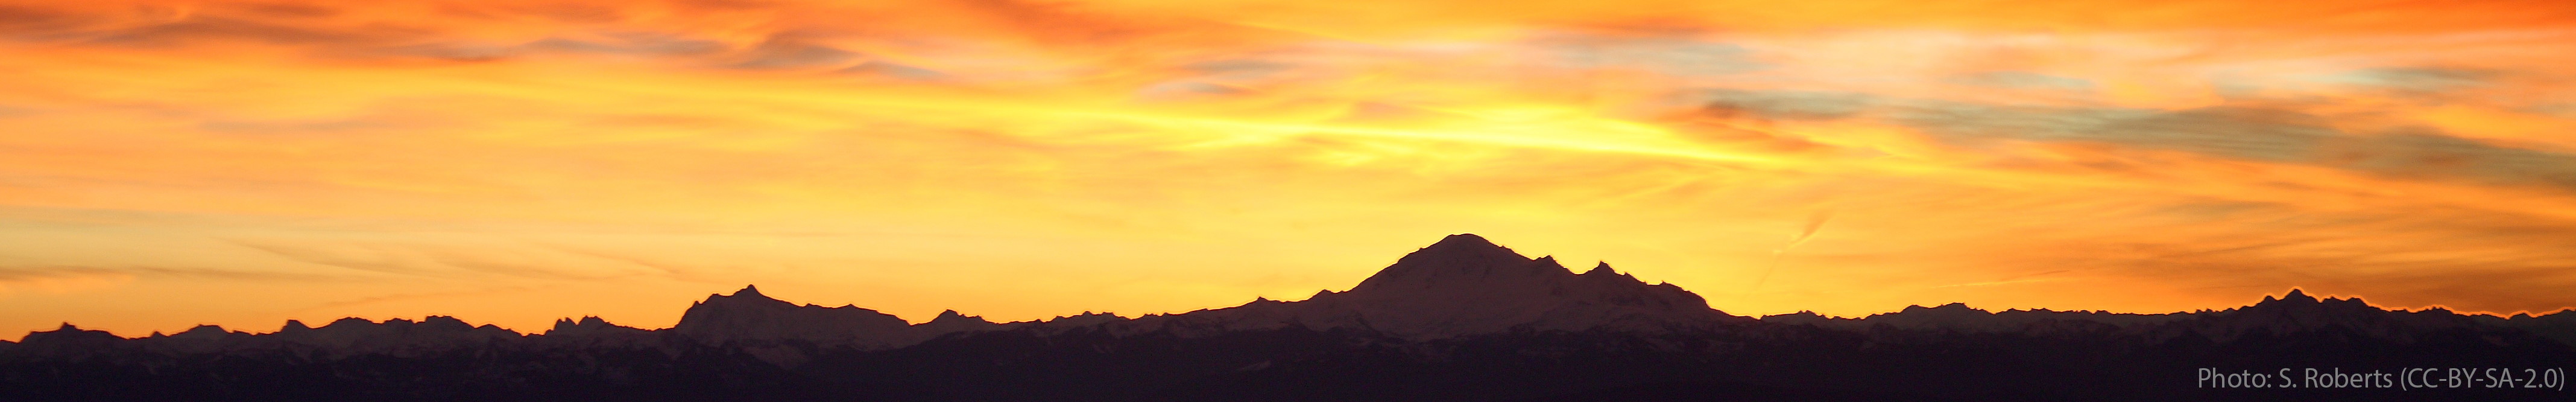 A shadowy silhouette of a mountain peak against an orange sky